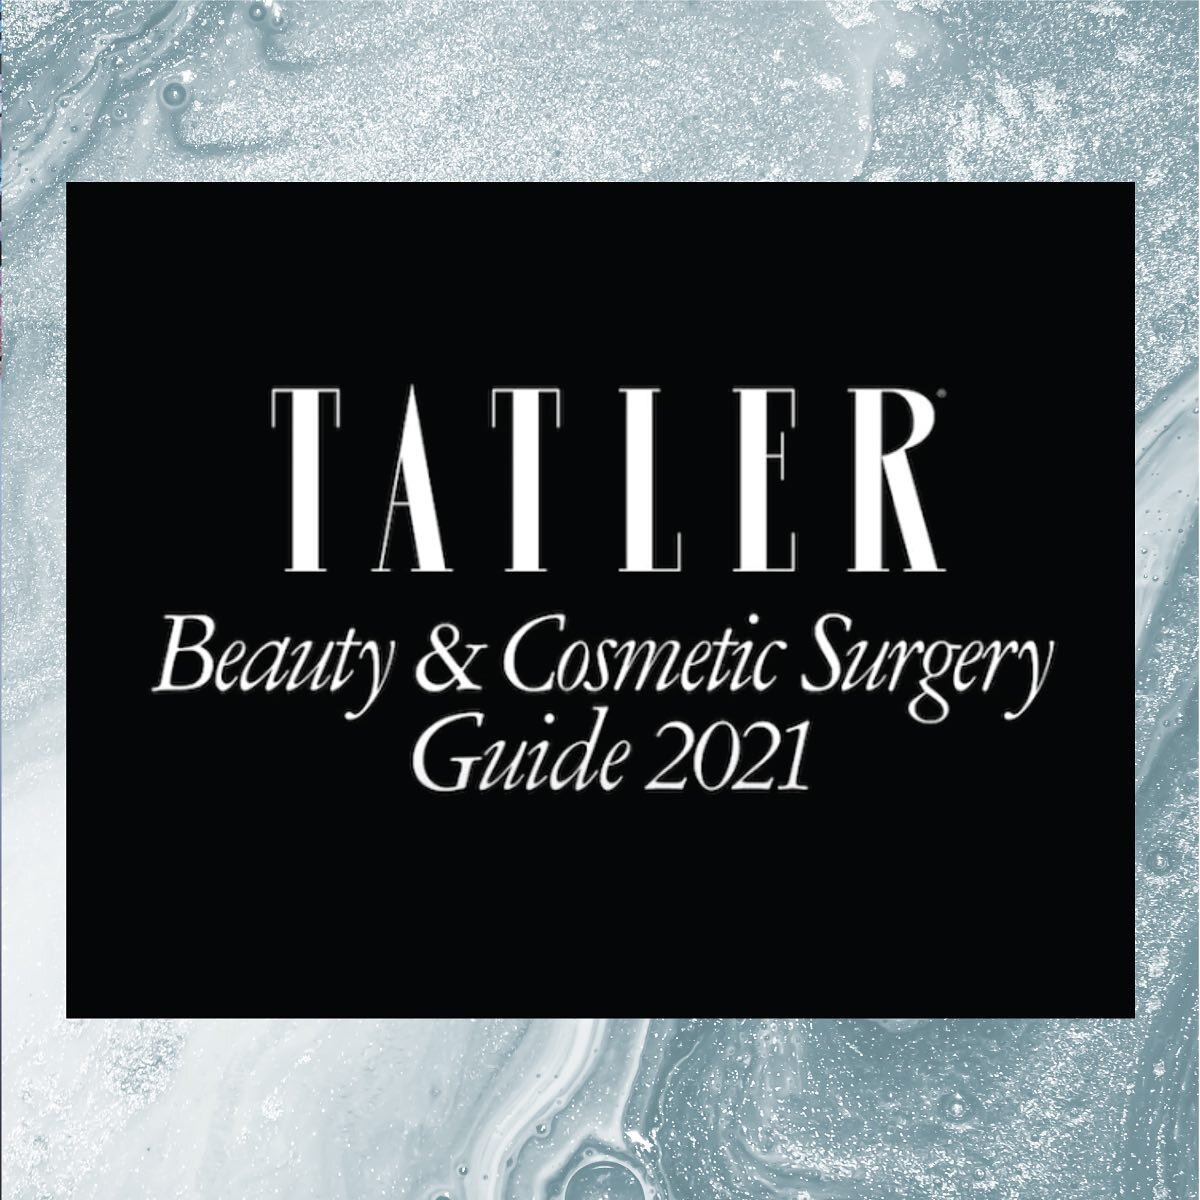 LightEyes is listed in Tatler&rsquo;s Beauty &amp; Cosmetic Surgery guide 2021 as three of the top treatments in The Lovely Clinic! We are proud to say that Dr Sarah Tonks, Dr Kishan Raichura, Dr Semira Kwabi and Dr Euan Mackinnon in The Lovely Clini